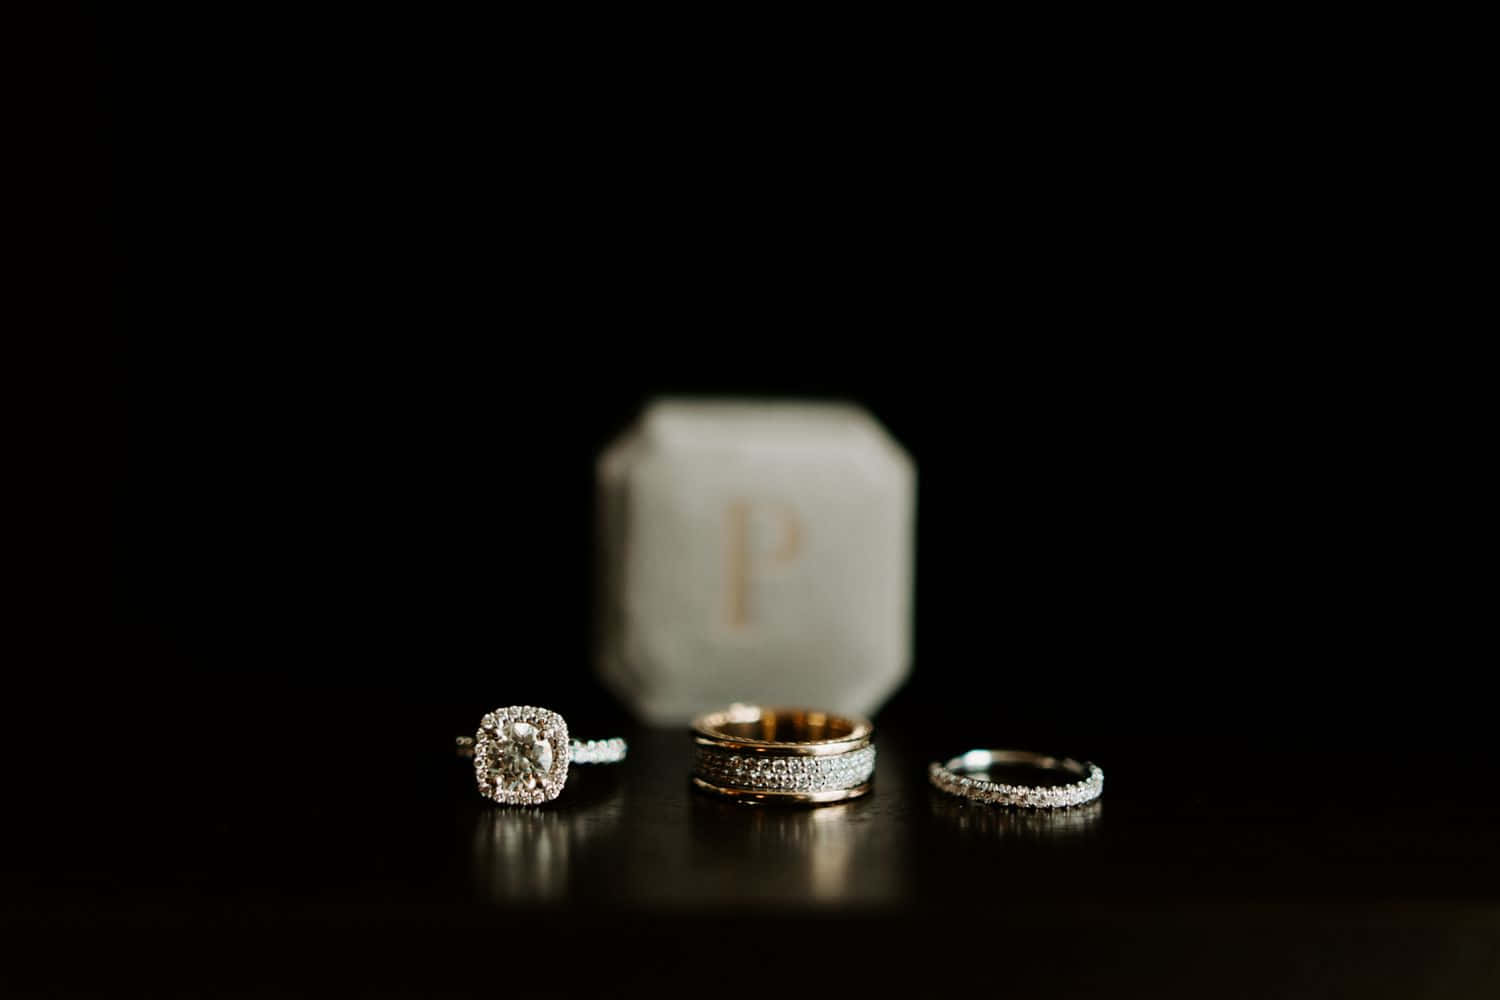 A beautiful set of wedding rings, capturing the perfect moment with a promise of never-ending love.